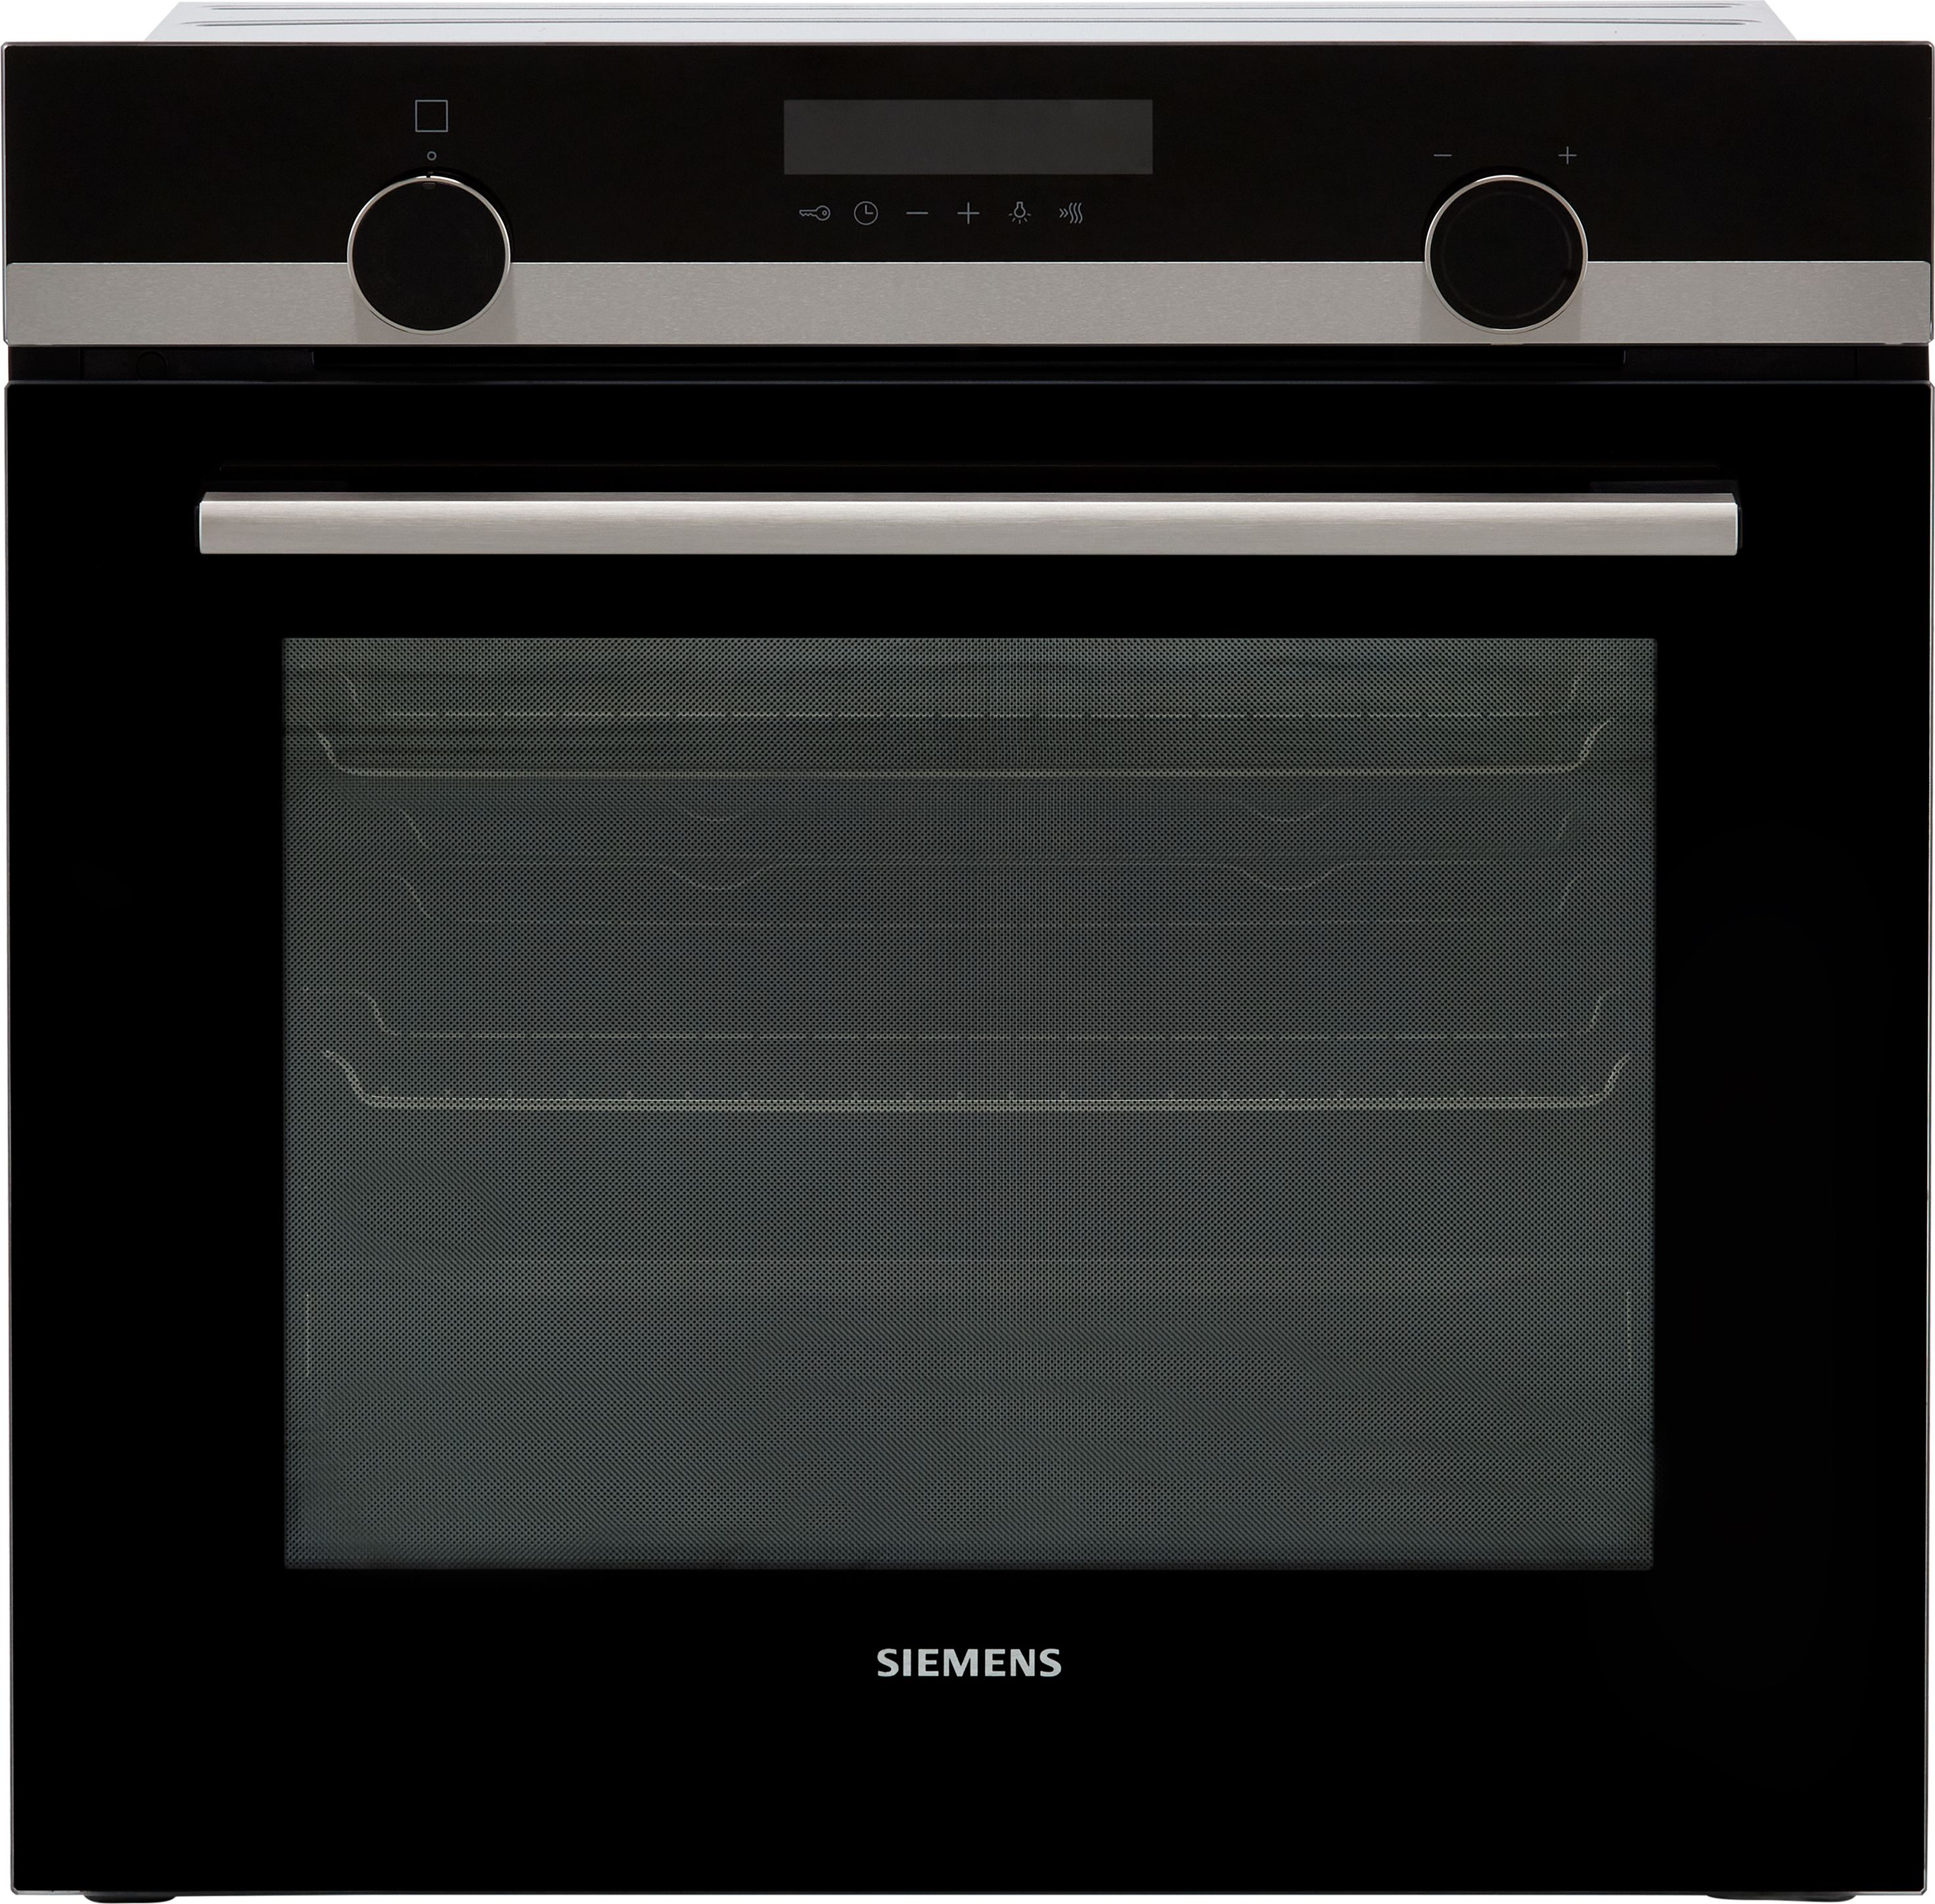 Siemens IQ-500 HB578A0S6B Wifi Connected Built In Electric Single Oven with Pyrolytic Cleaning - Stainless Steel - A Rated, Stainless Steel